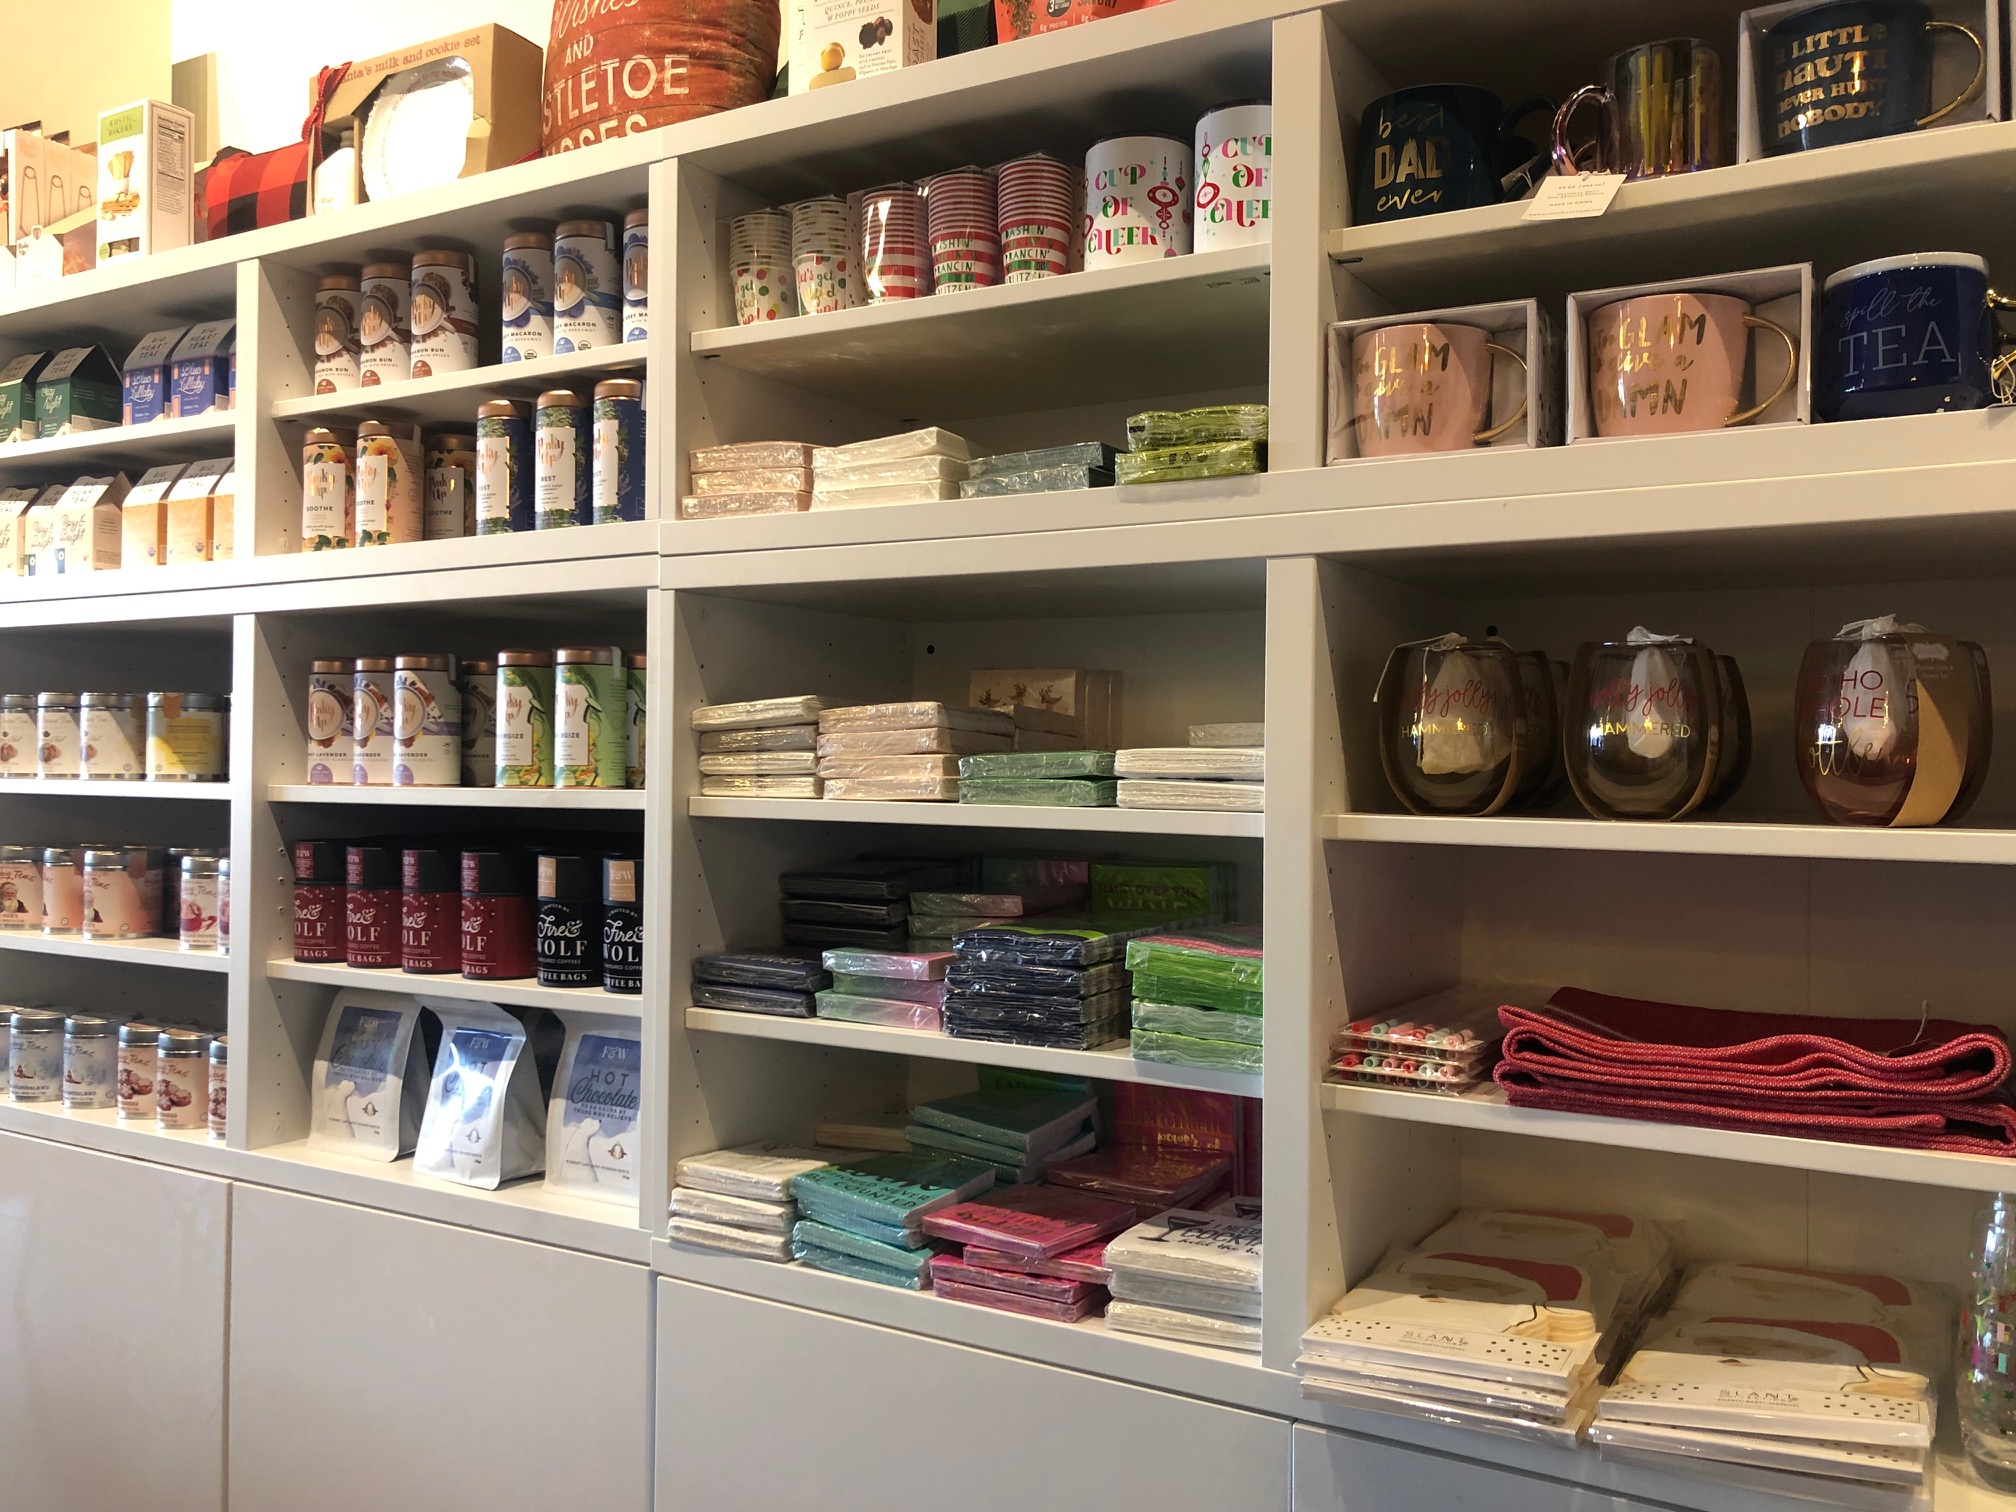 On white shelves, napkins, glasses, and tableware are for sale. Photo by Alyssa Buckley.